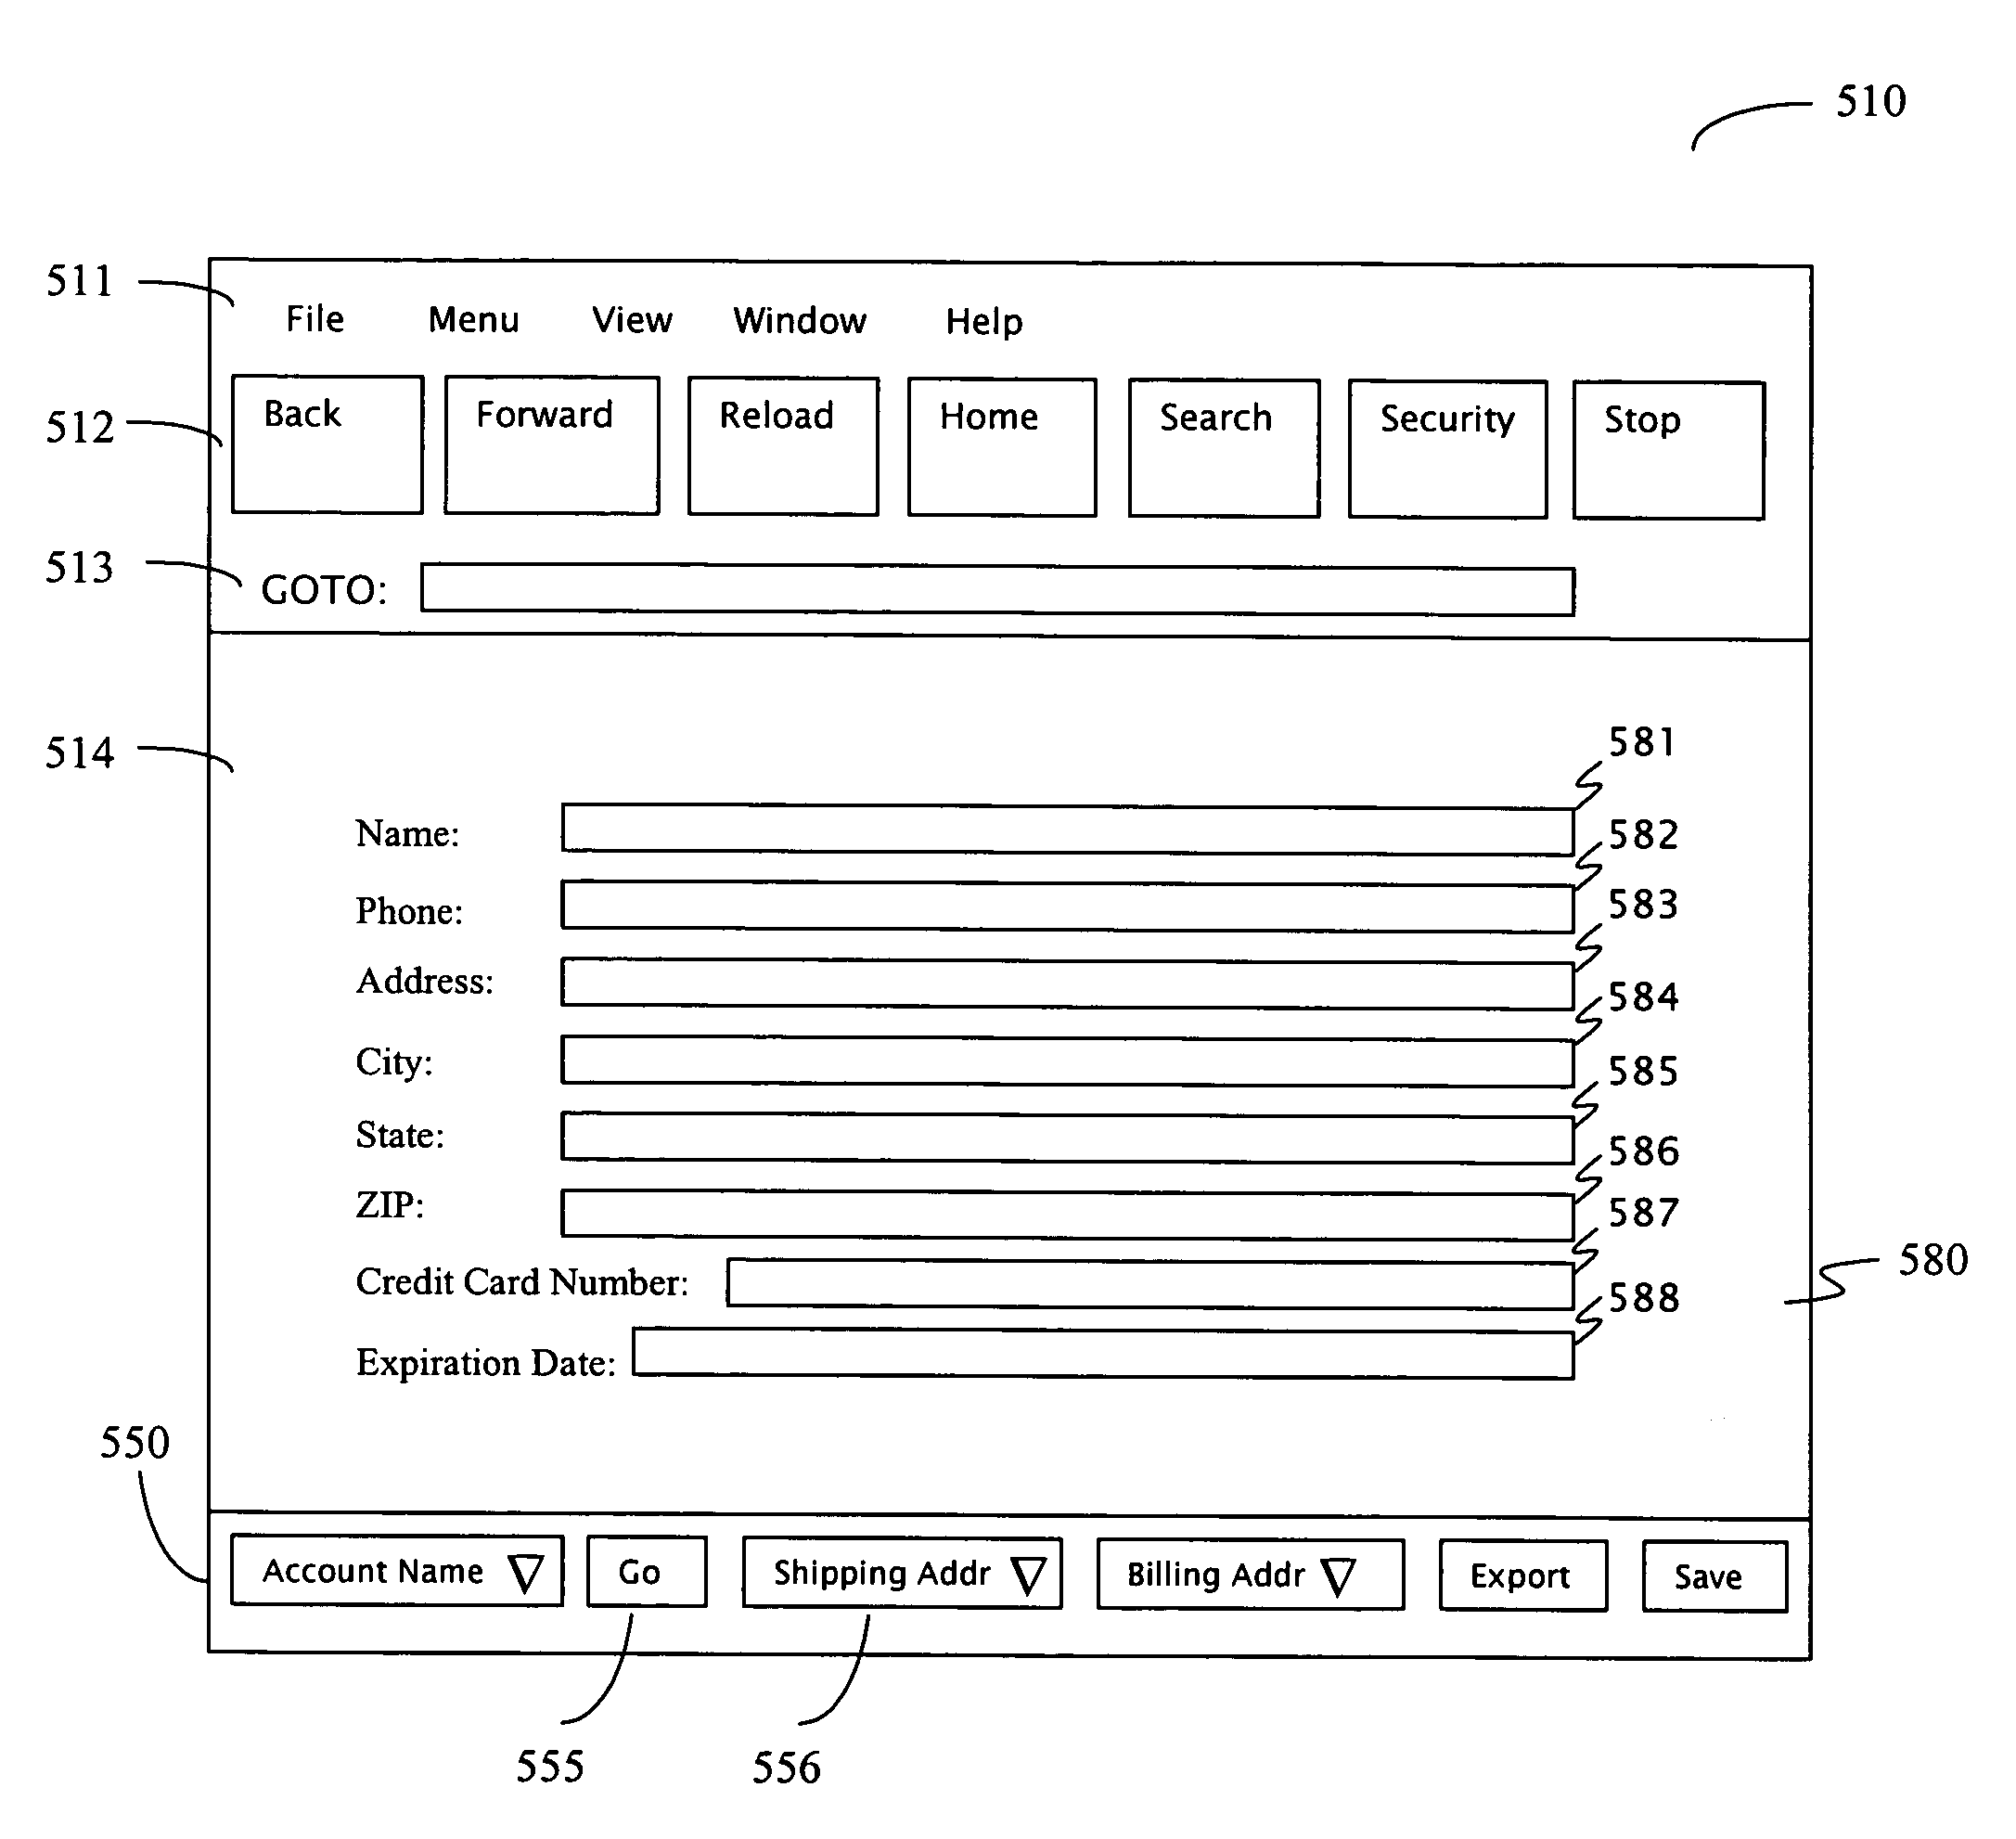 Method and system of implementing recorded data for automating internet interactions